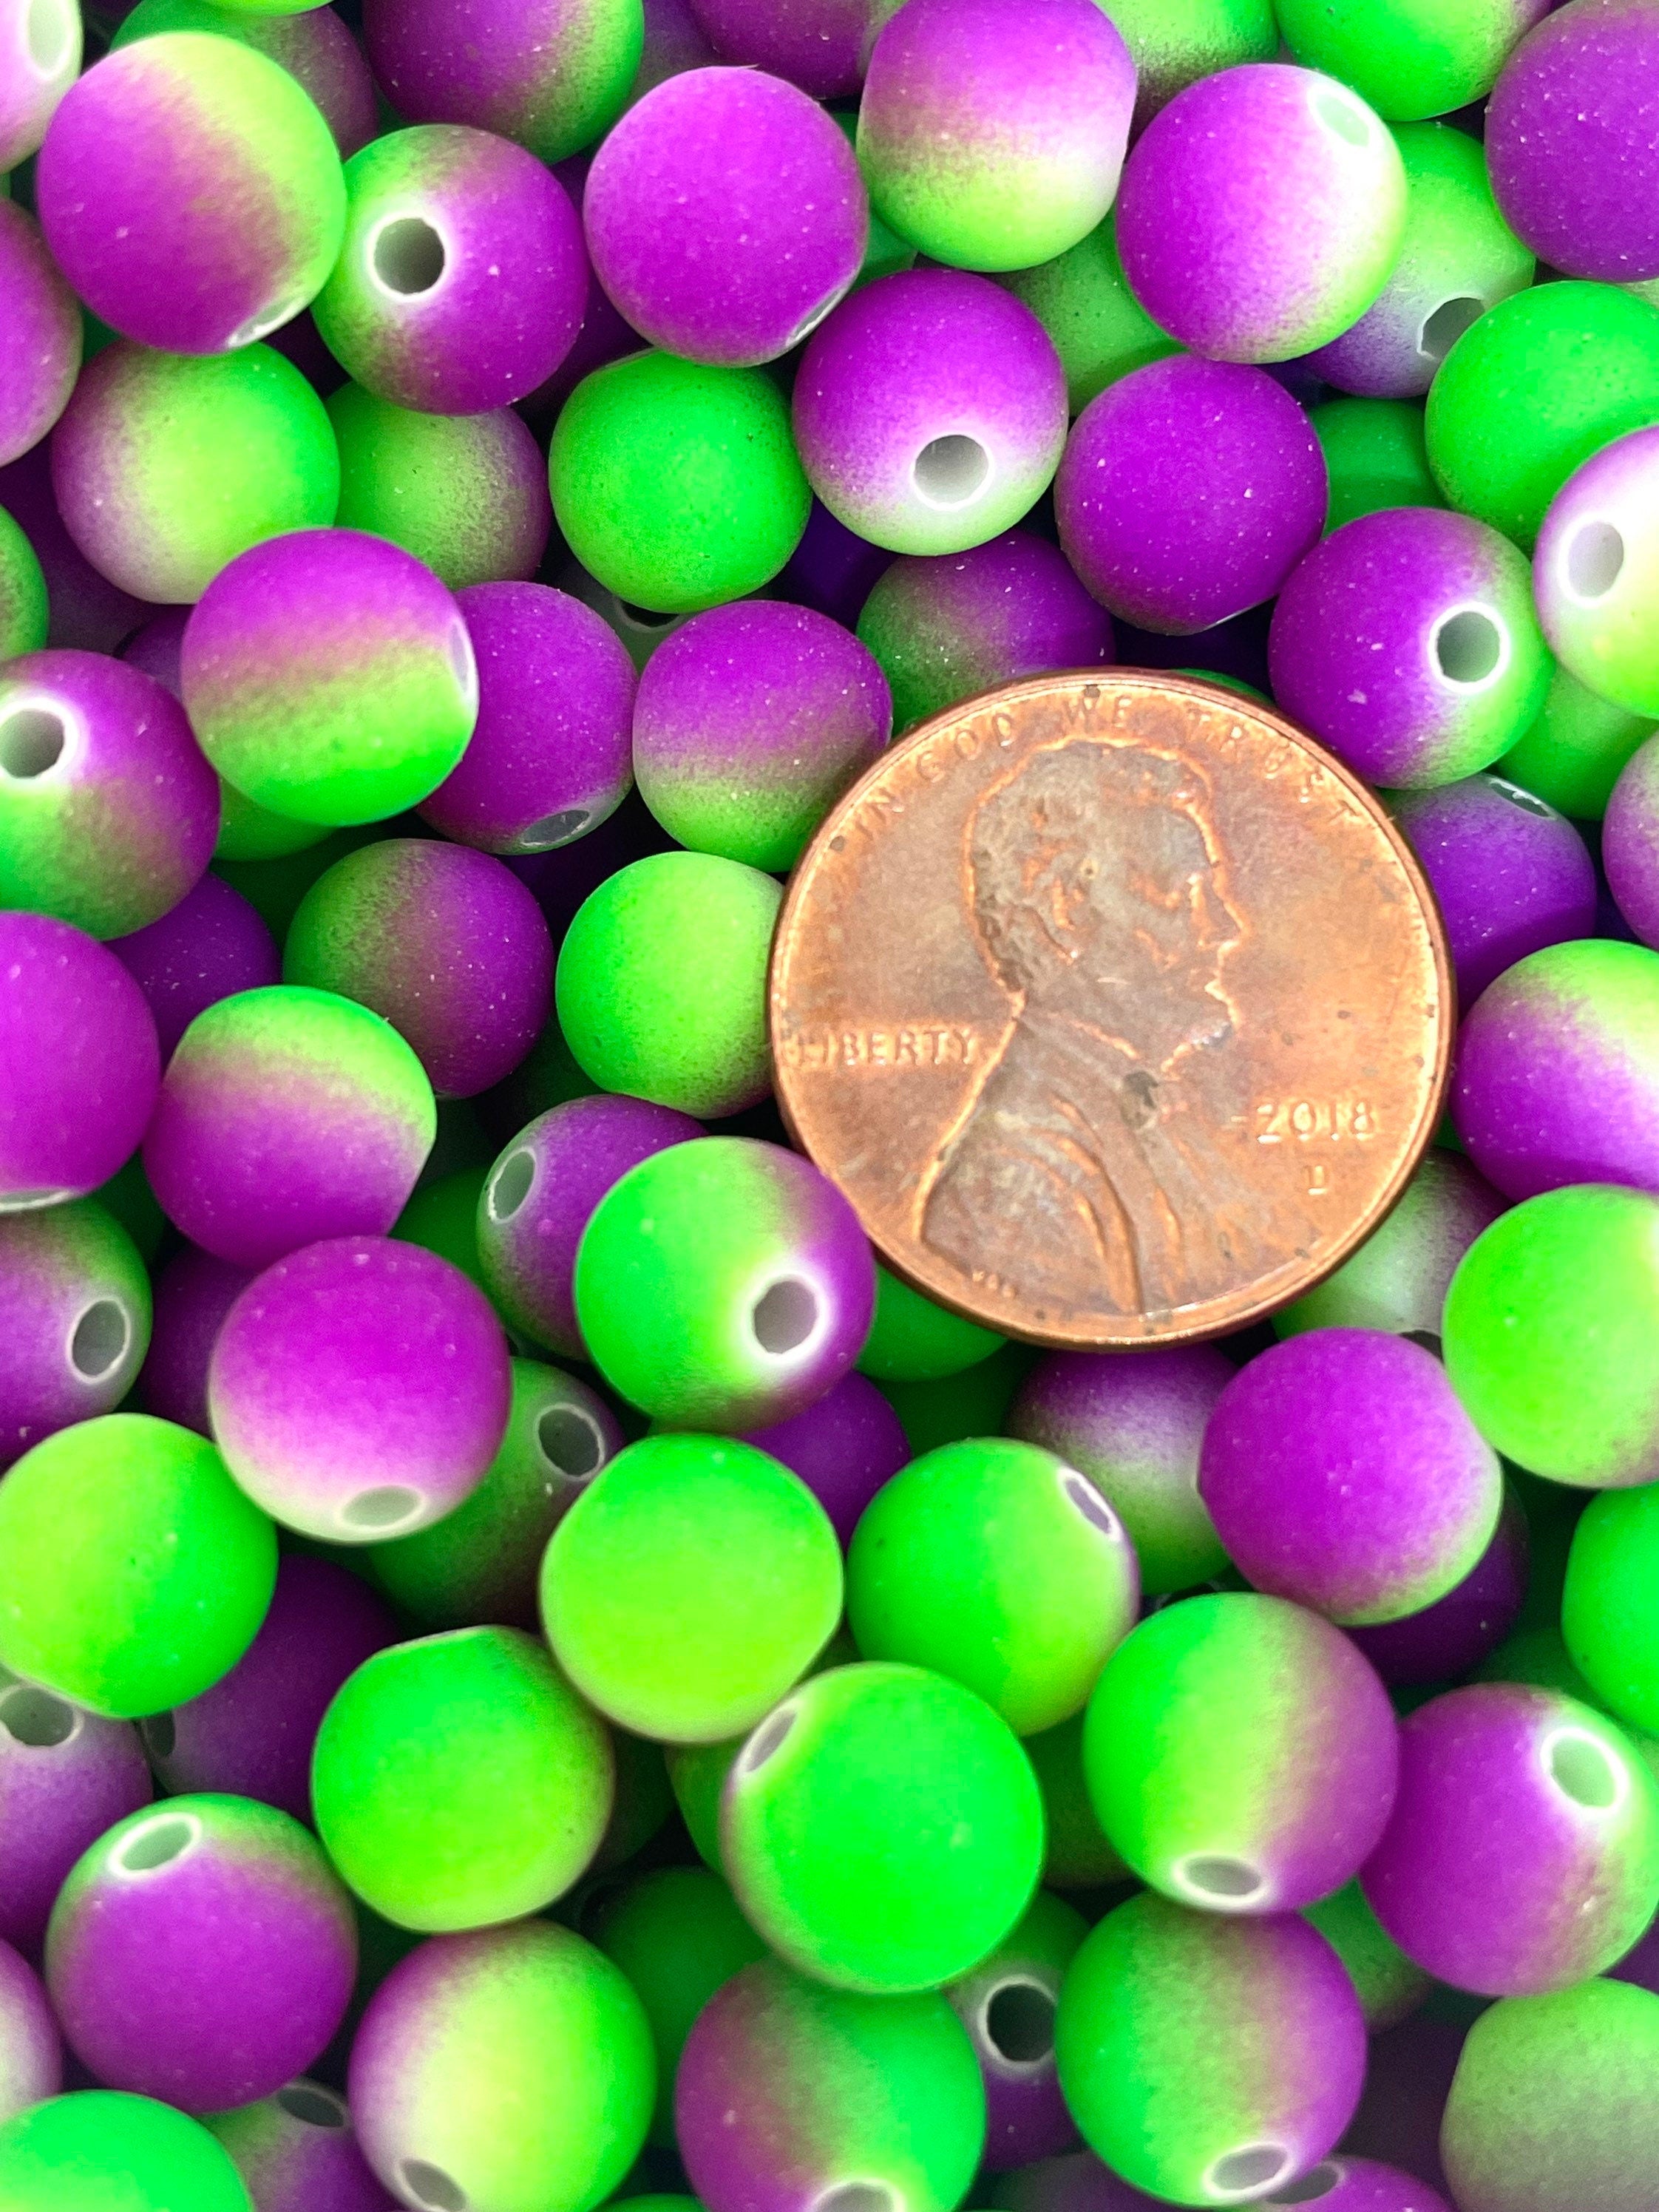 Bright Neon Green and Purple Round Beads, Rubberized Beads, Rave Beads, EDM Jewelry, Festival Beads